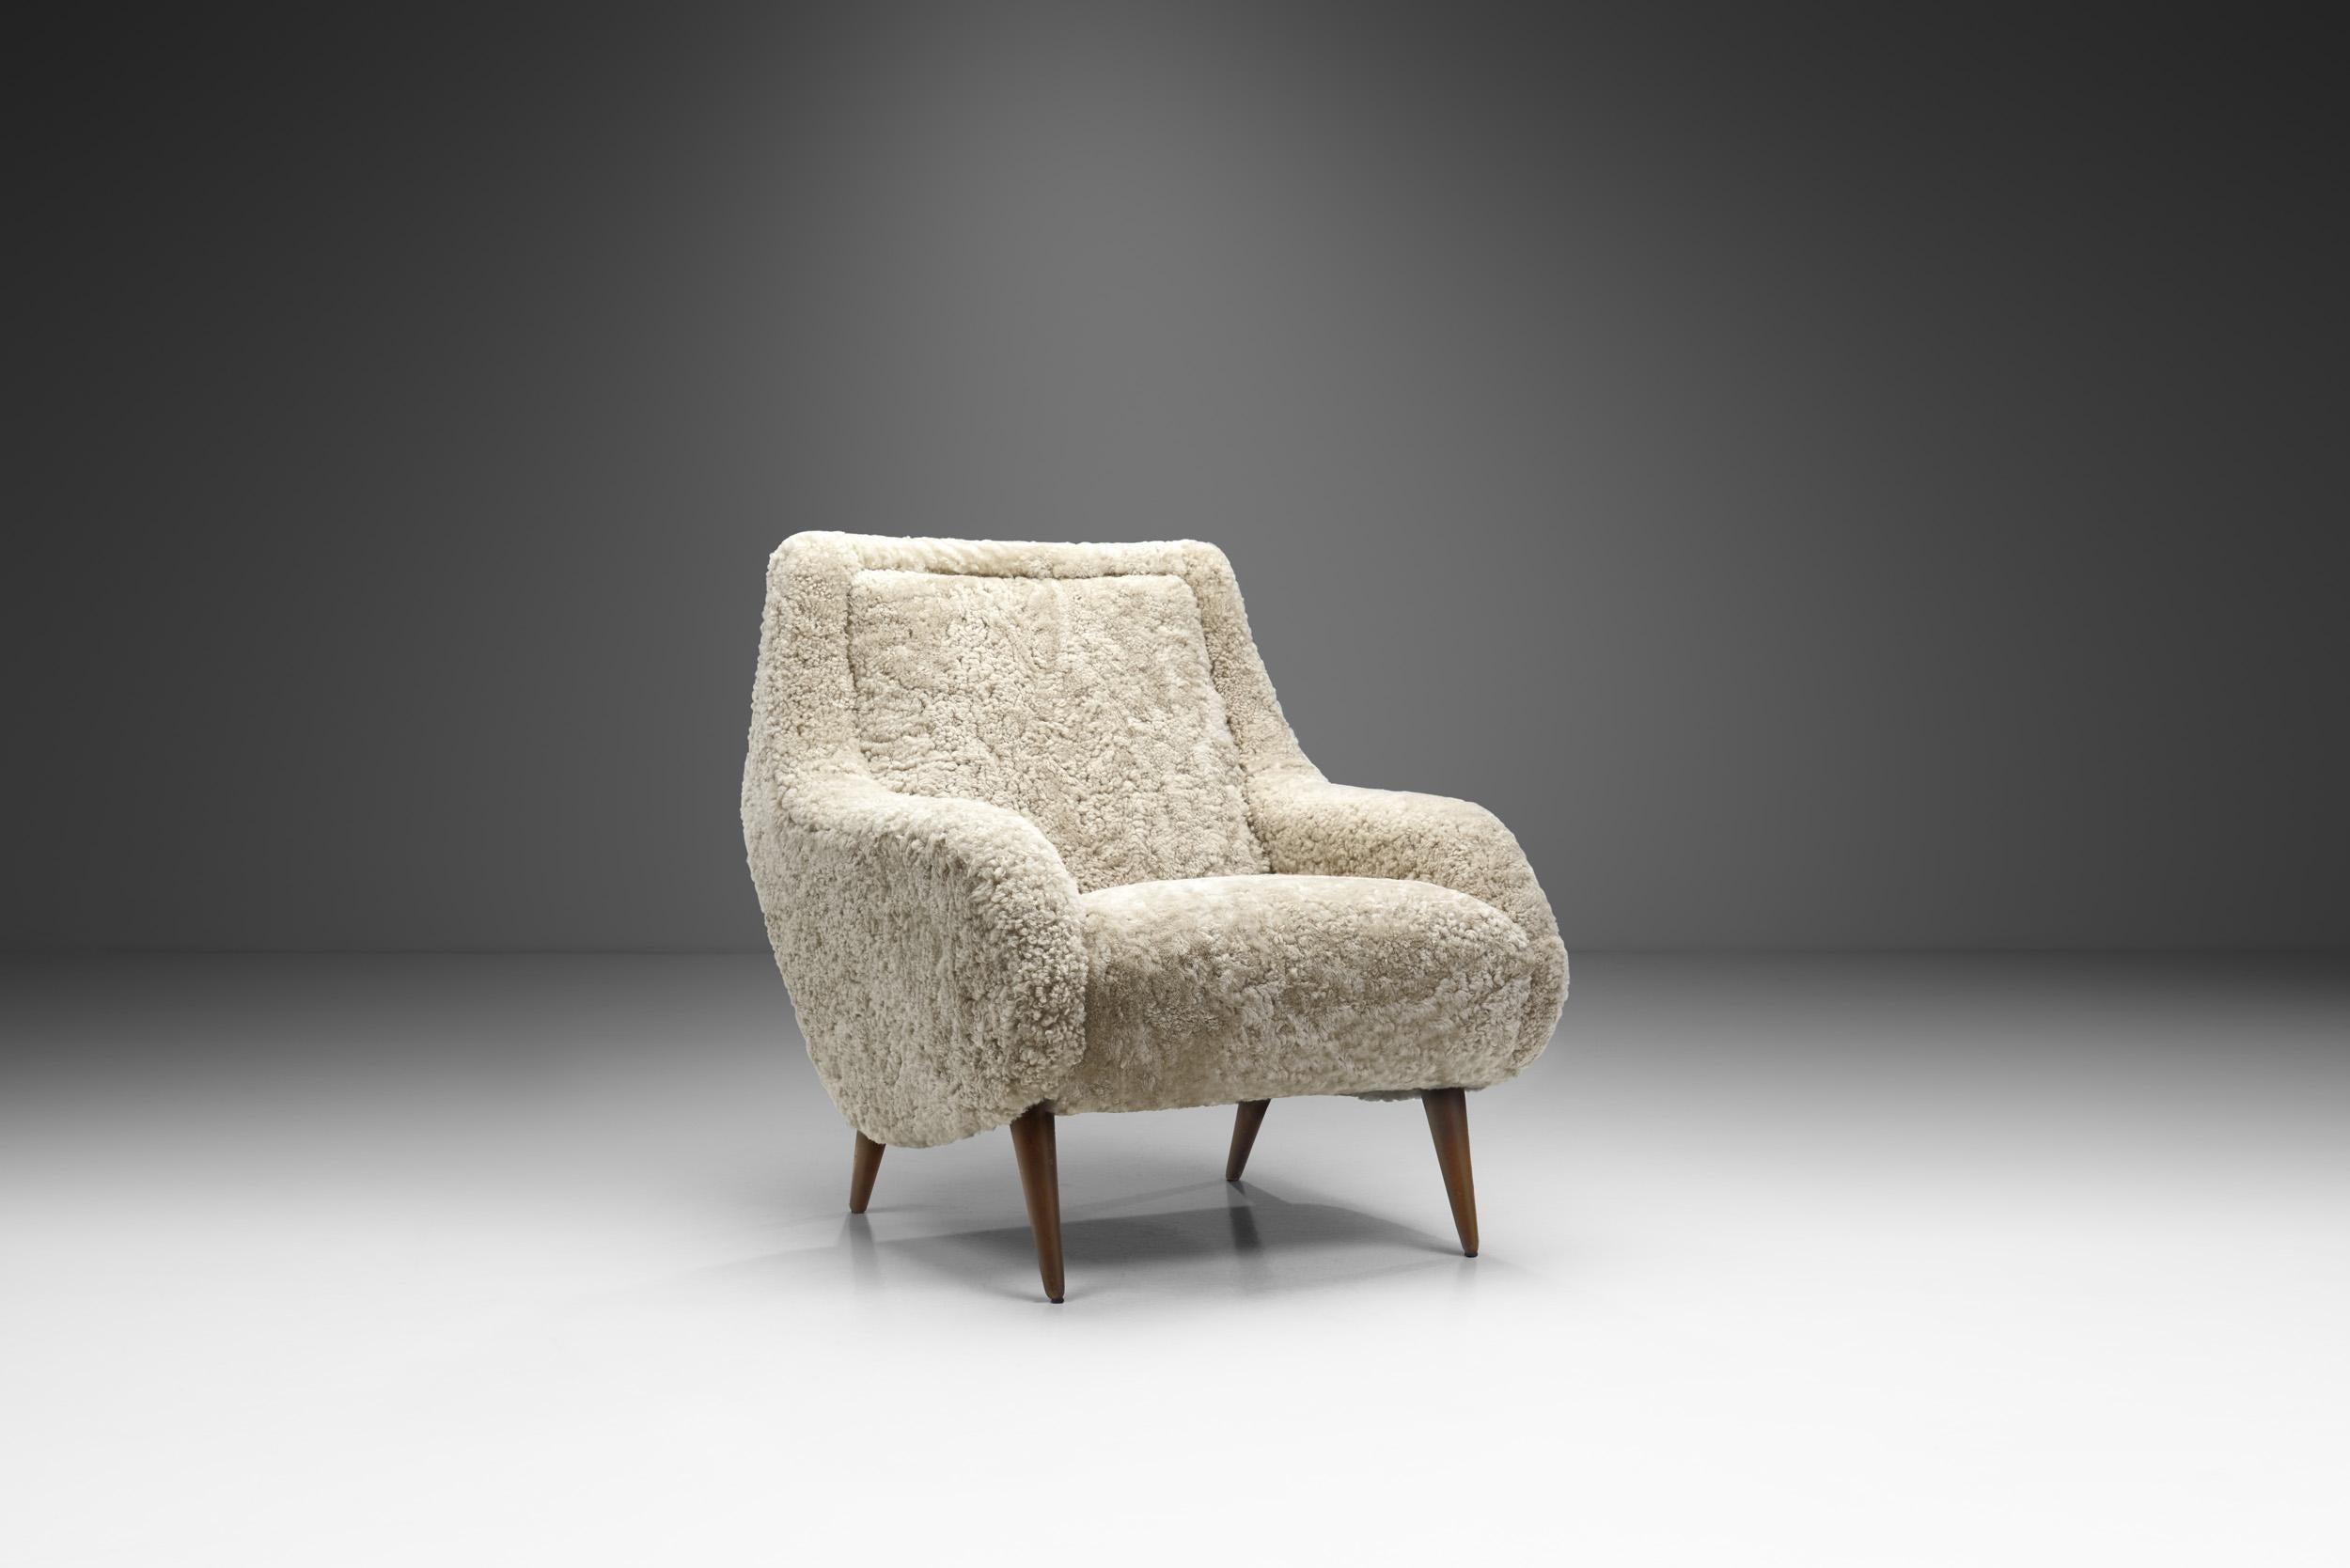 This lounge chair model known as “Ombord” was designed by Ruda for the legendary company, Nordiska Kompaniet. NK was often the first to introduce new products on the Swedish market, such as jeans, nylon stockings, TVs and Barbie dolls, and the list